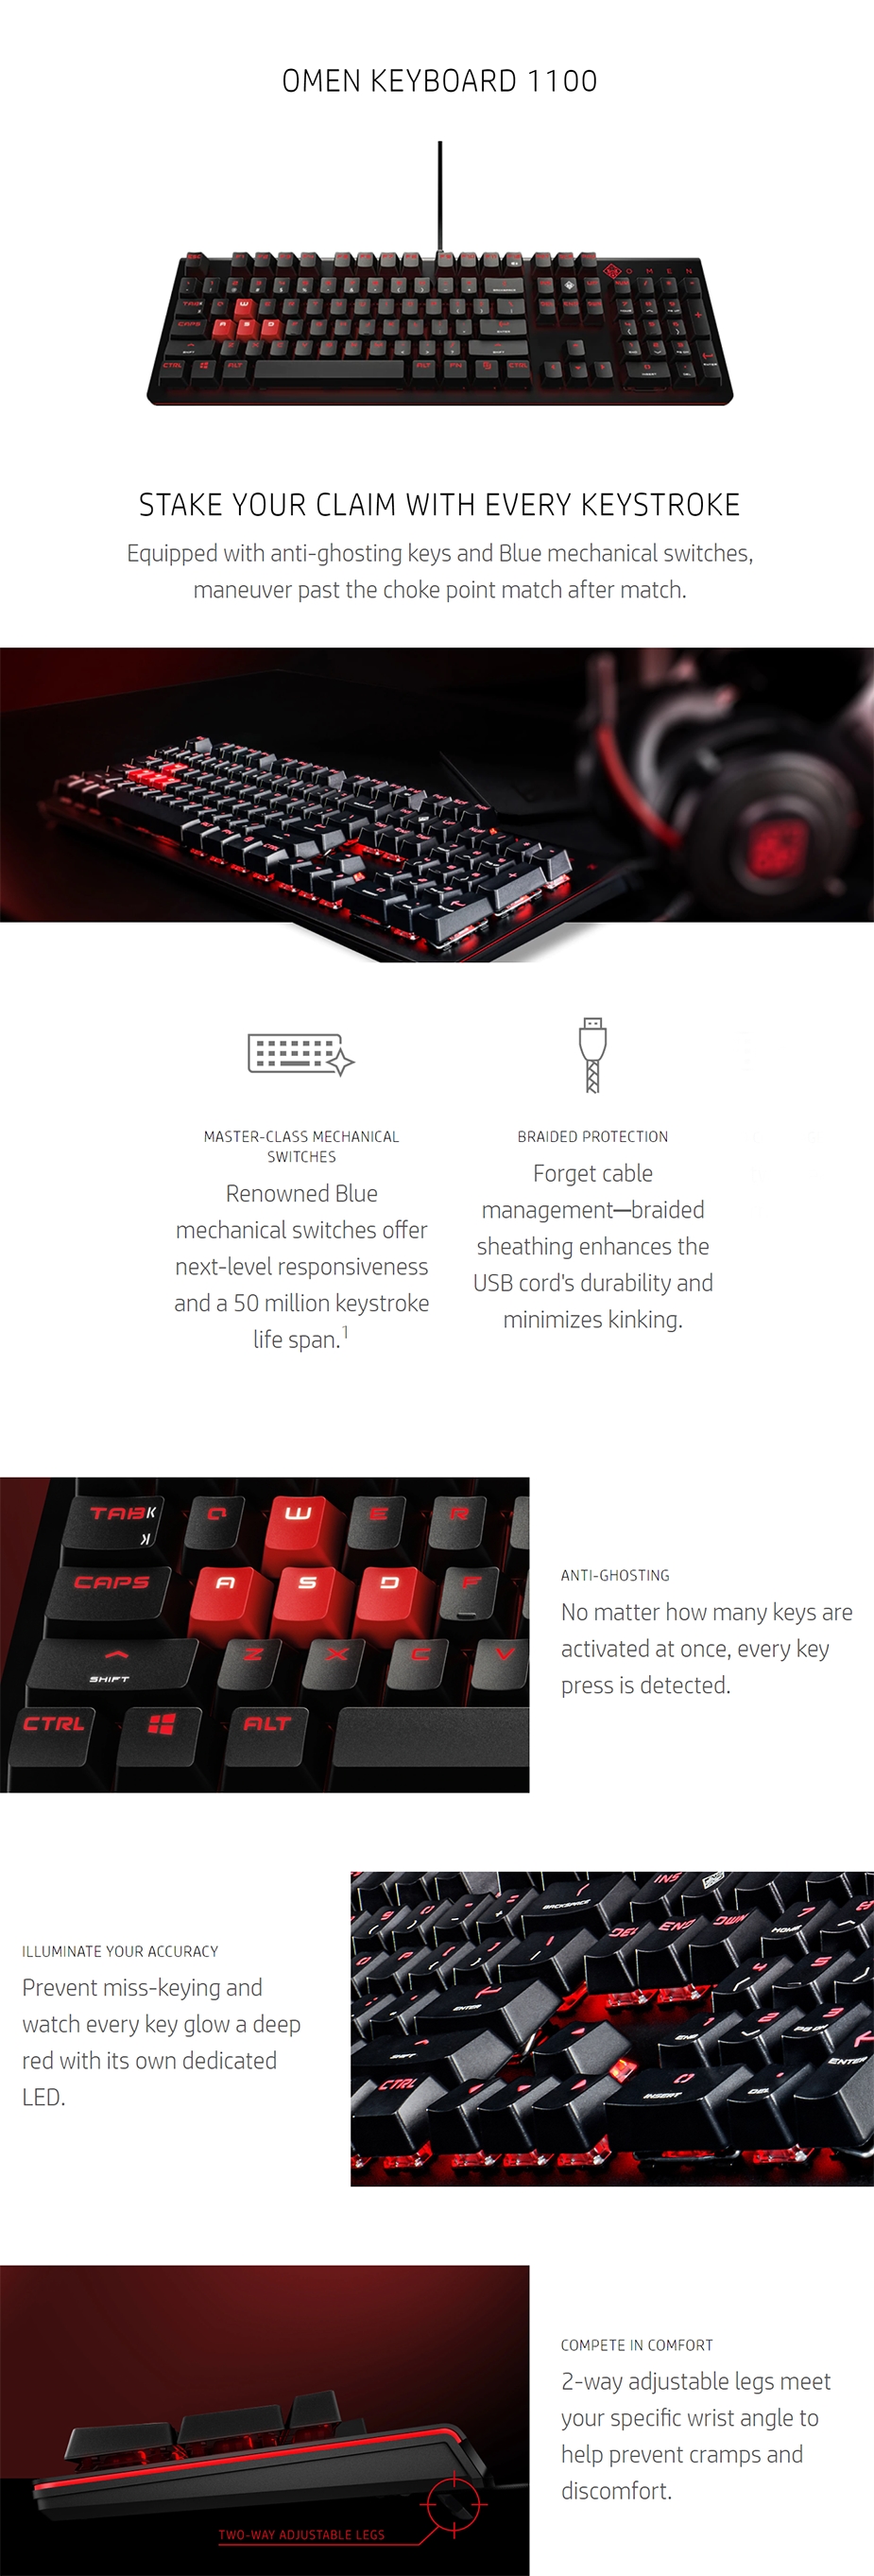 HP OMEN 1100 1MY13AA Gaming Keyboard with Blue Mechanical Switch Details